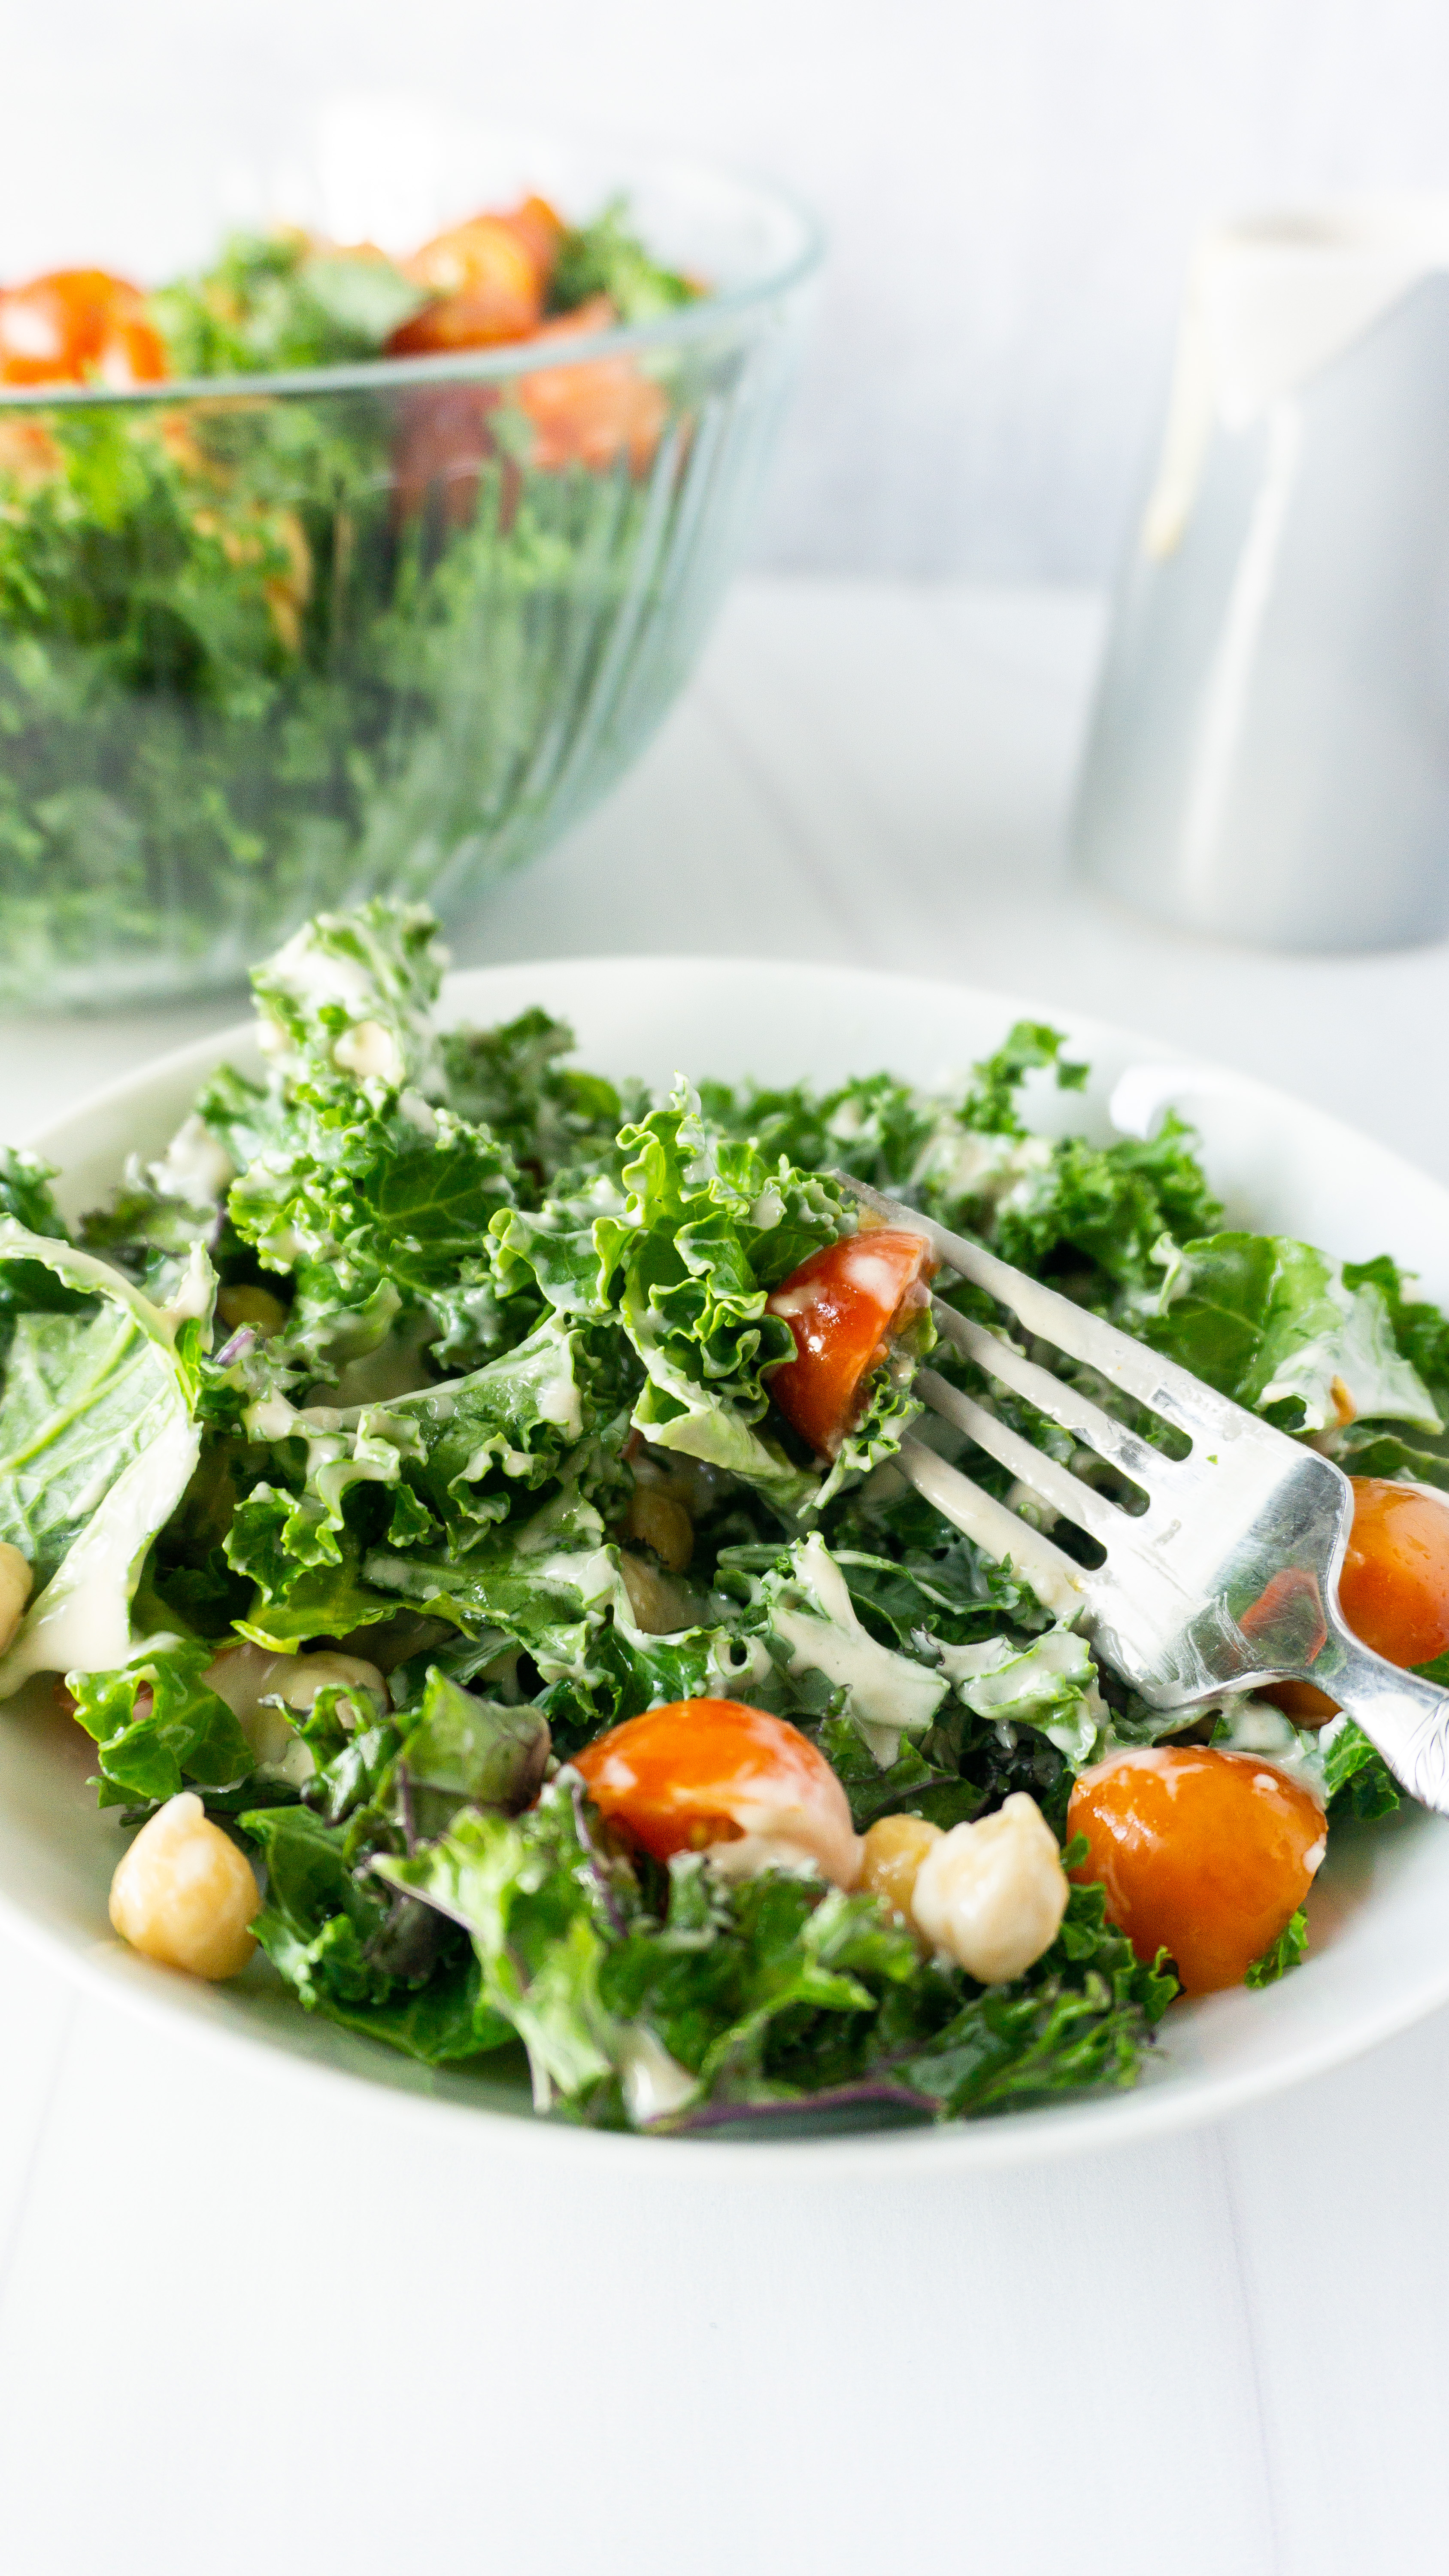 crunchy raw kale salad with a lemon tahini dressing on top with tomatoes and chickpeas as well.